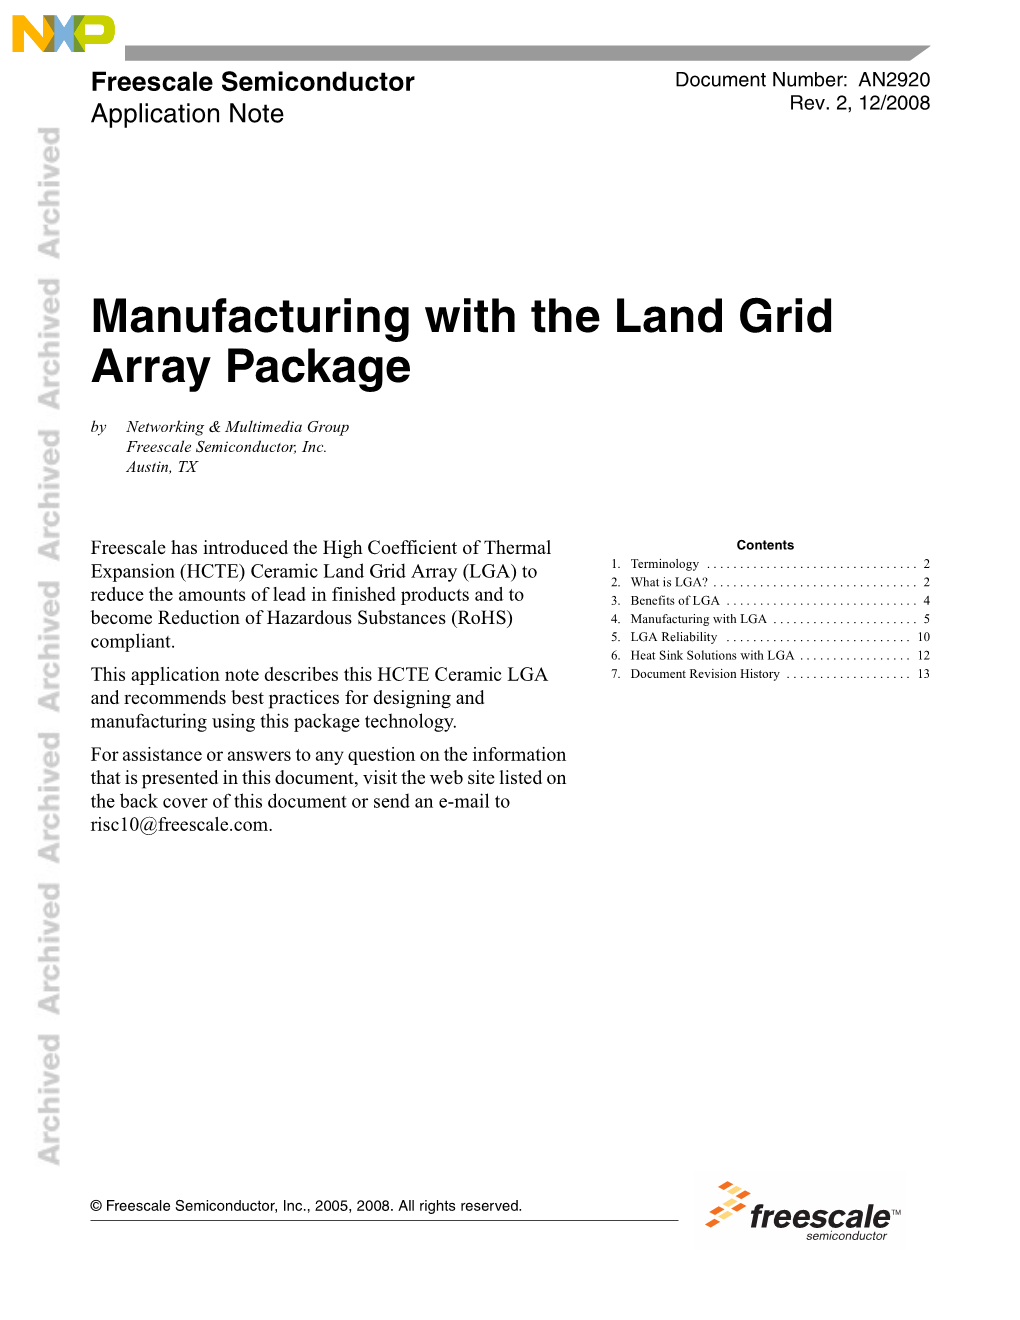 Manufacturing with the Land Grid Array Package by Networking & Multimedia Group Freescale Semiconductor, Inc